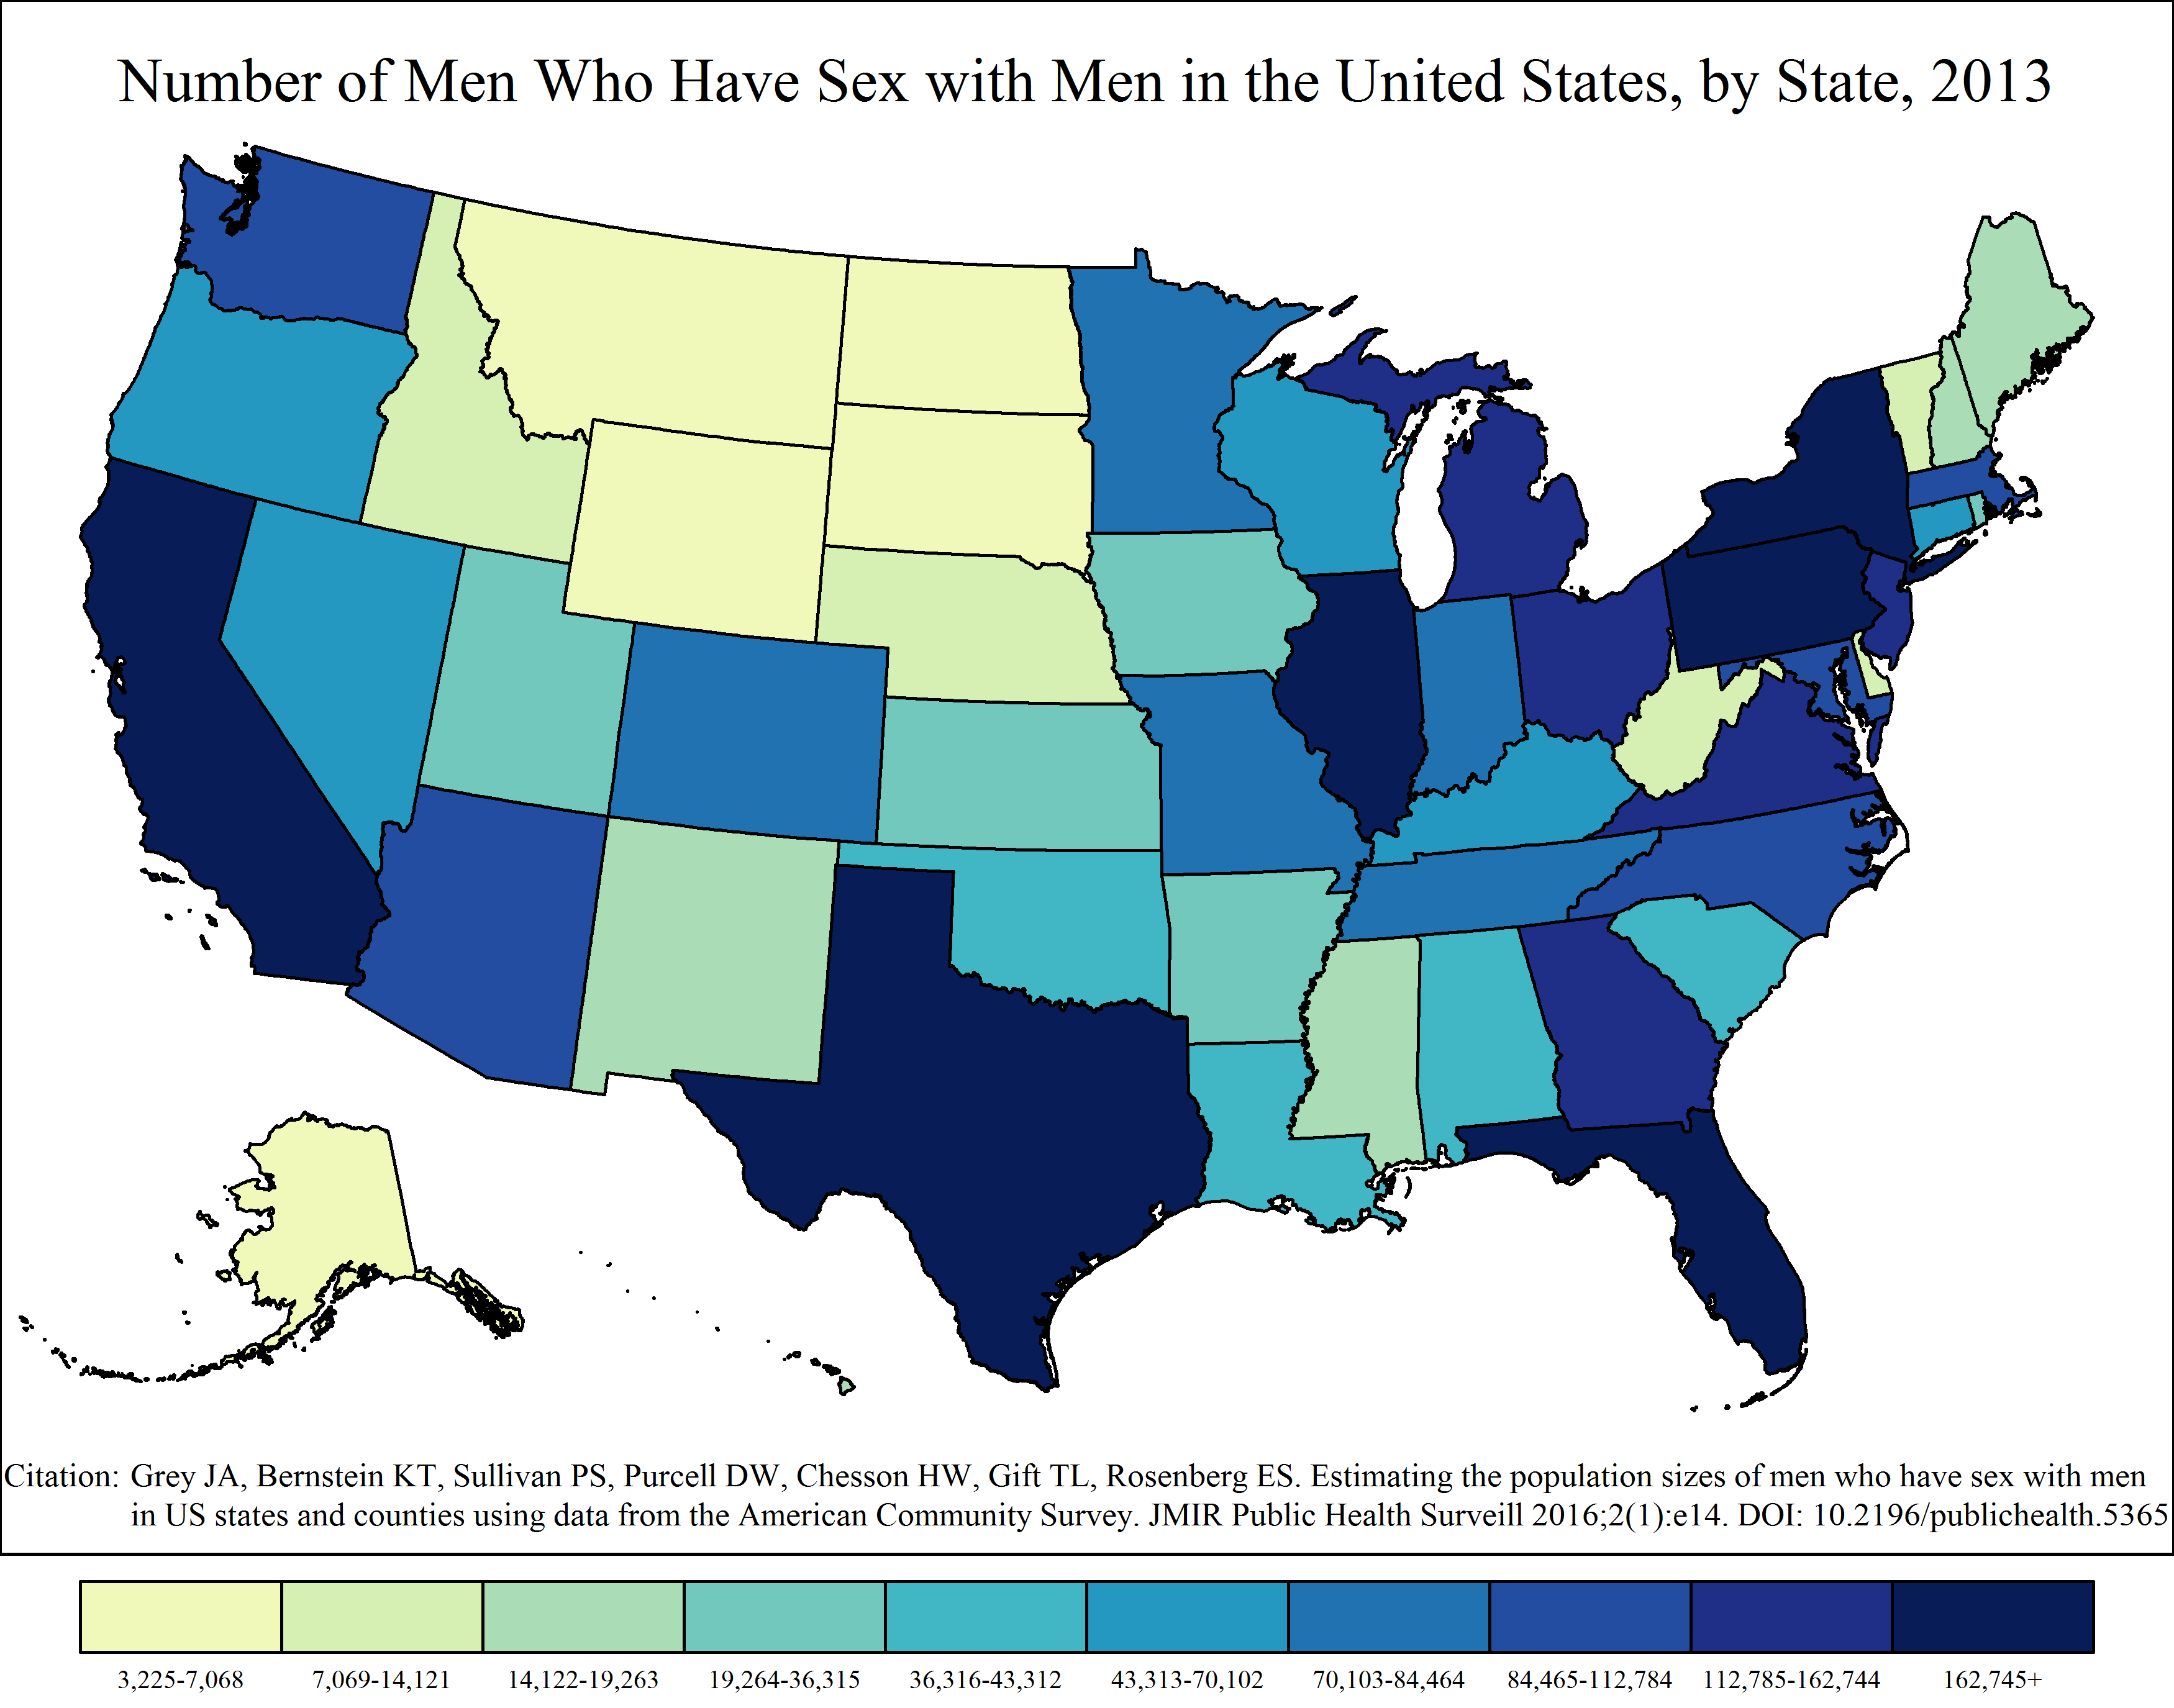 Estimating the Population Sizes of Men Who Have Sex With Men in US States and Counties Using Data From the American Community Survey